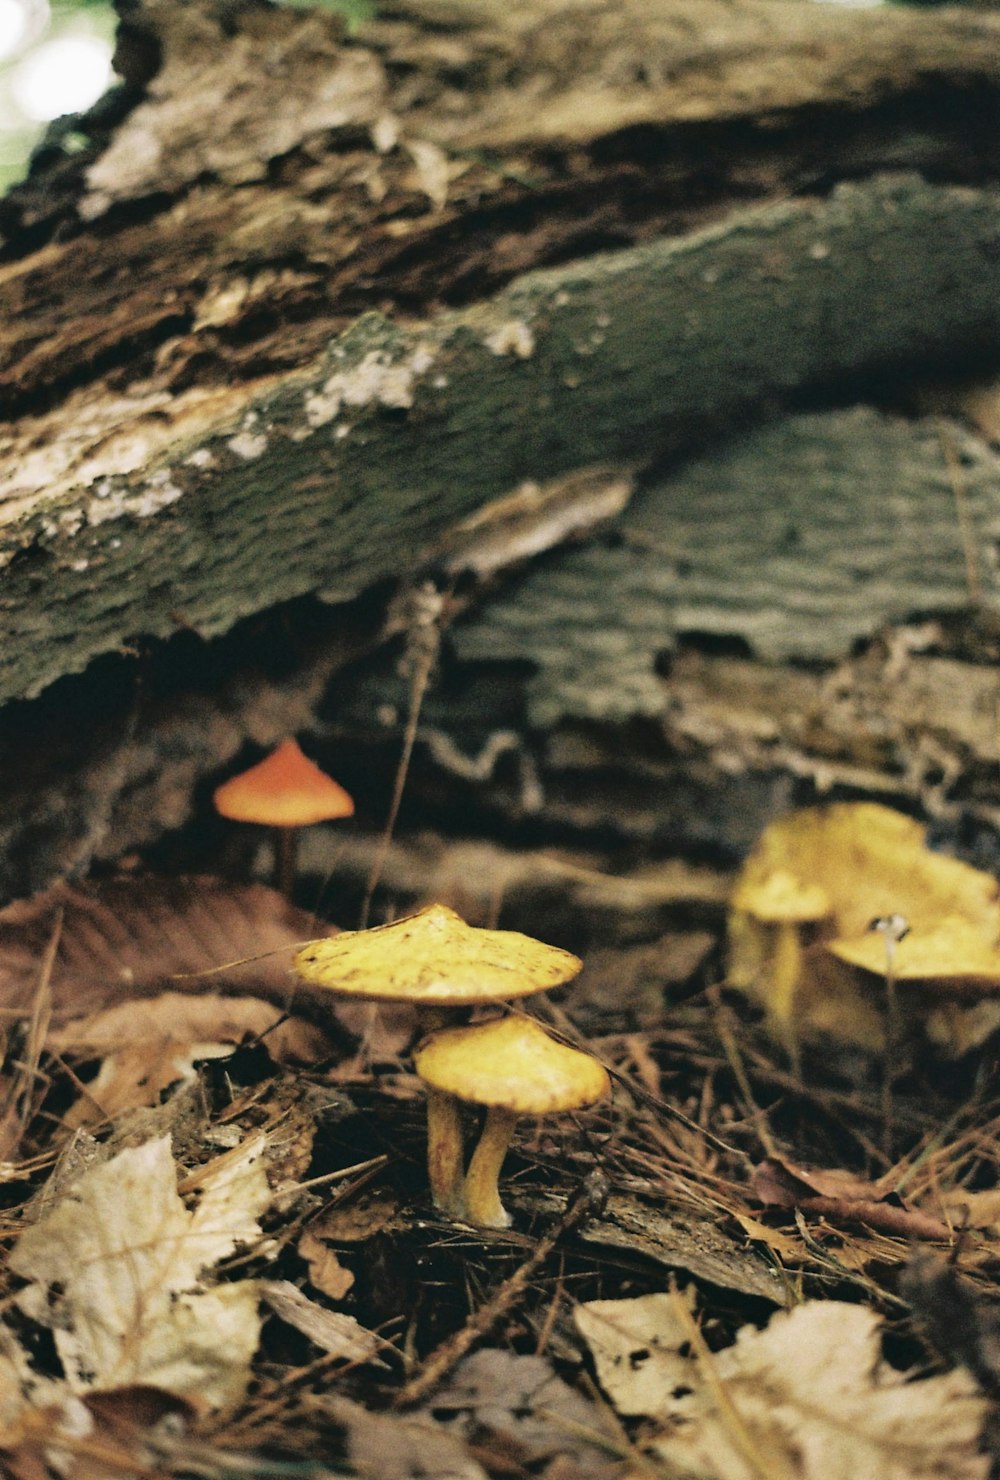 a group of mushrooms sitting on the ground